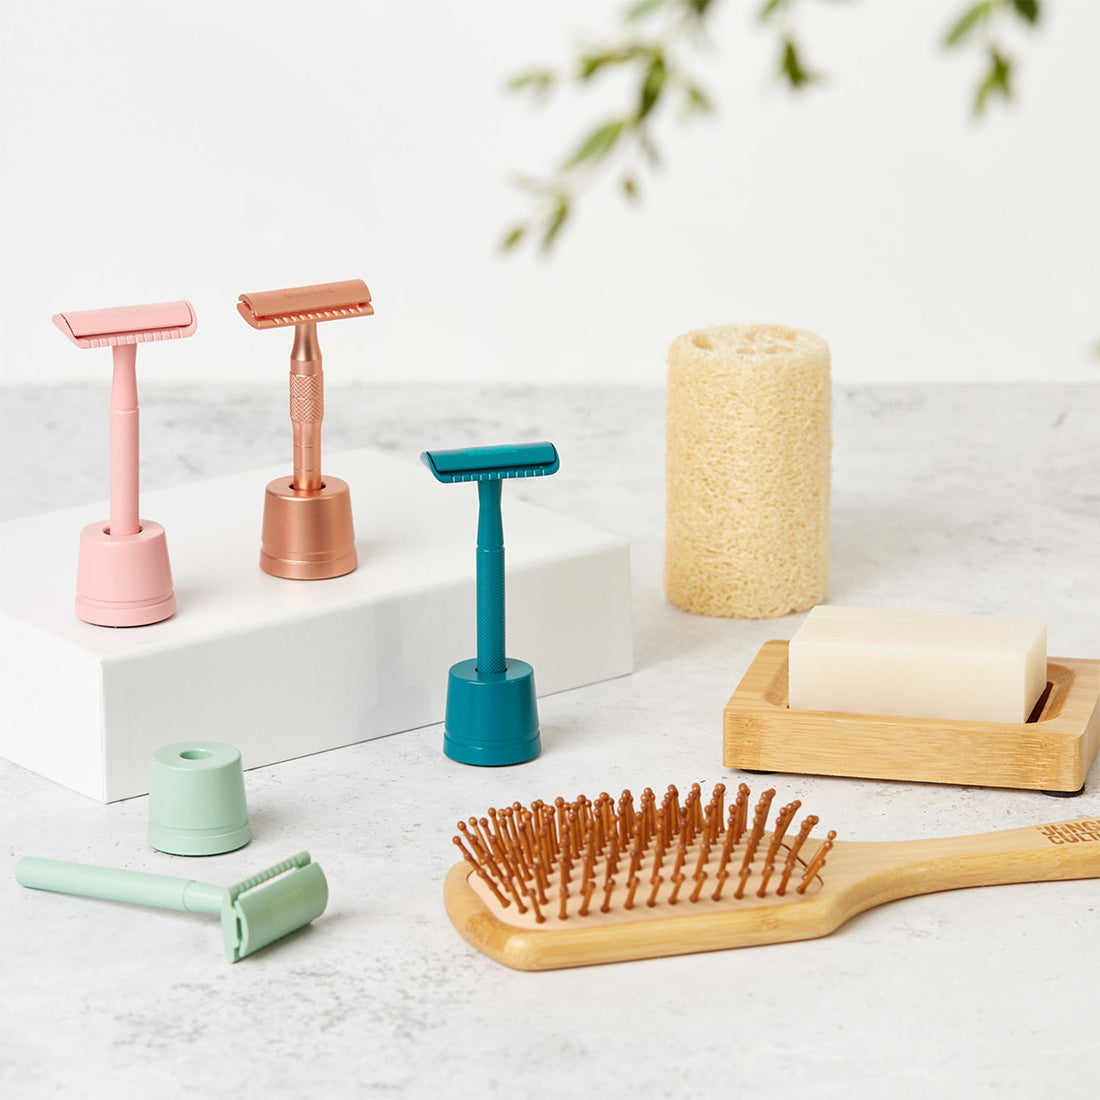 SafetyJungle Culture Razors with Stands Reusable Eco Razor